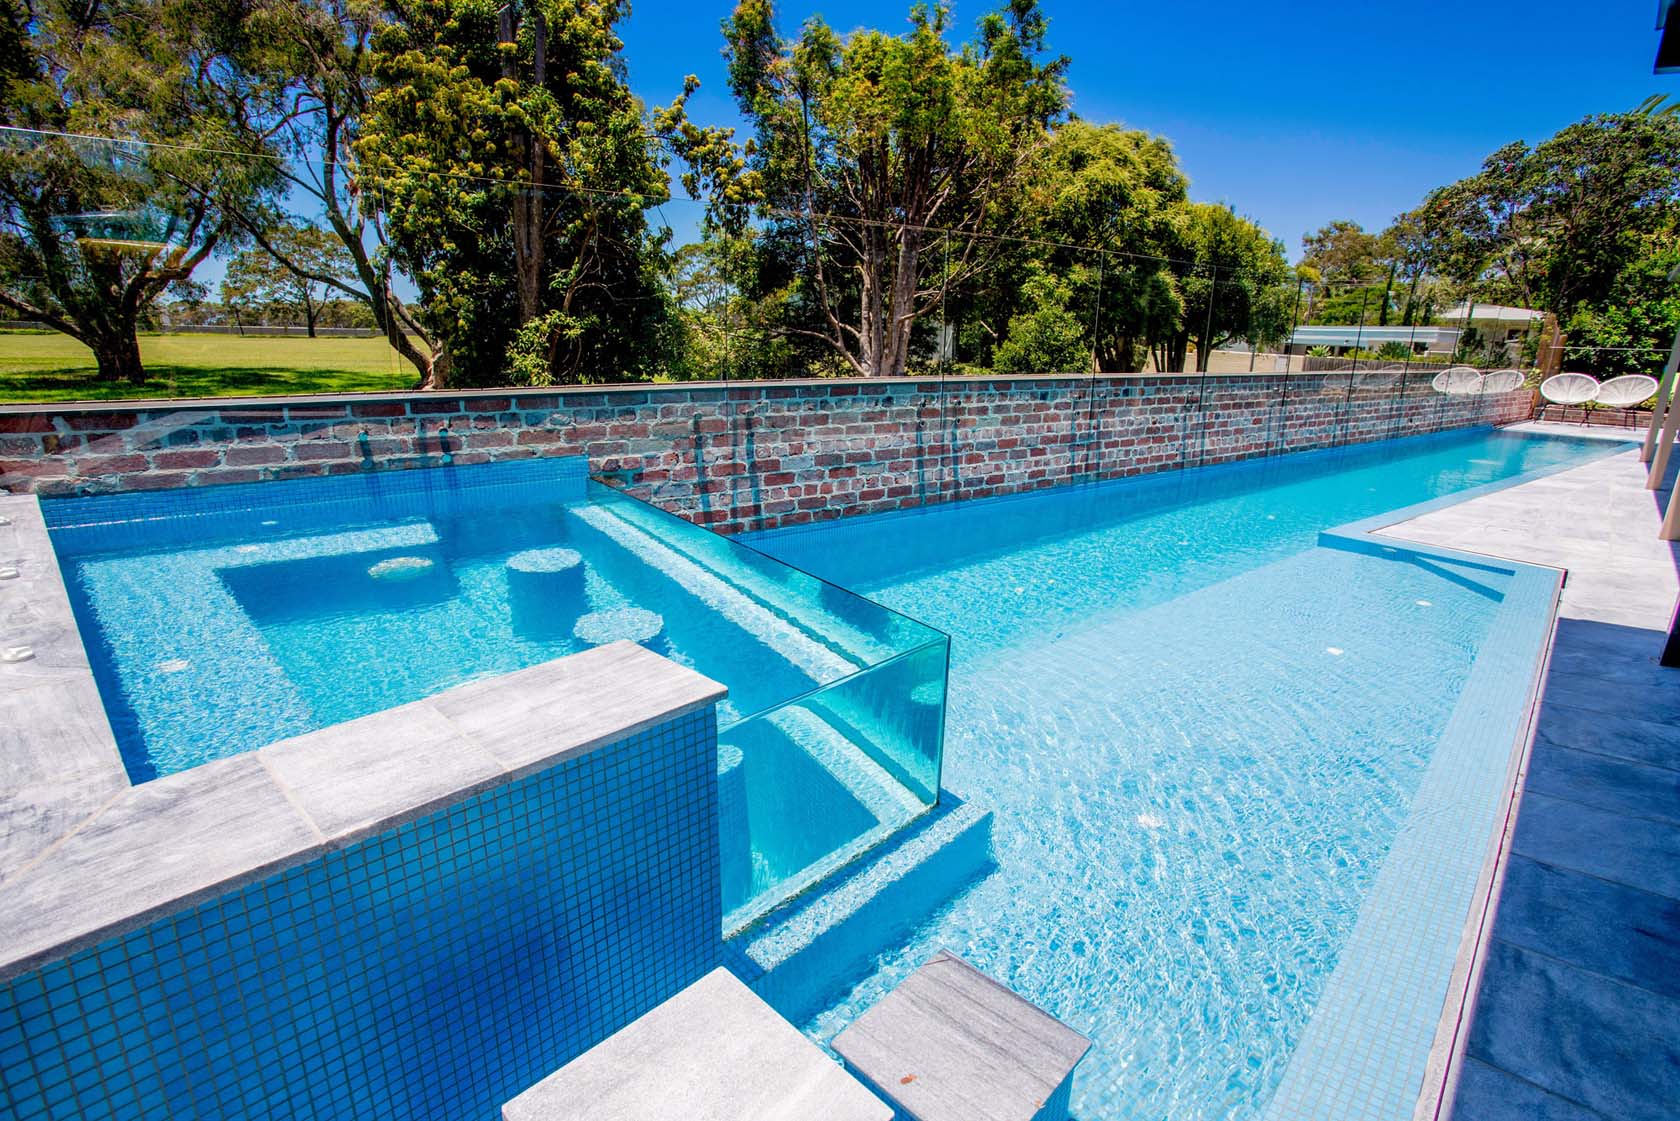 Parisian Blue Limestone pool coping and surround tiles